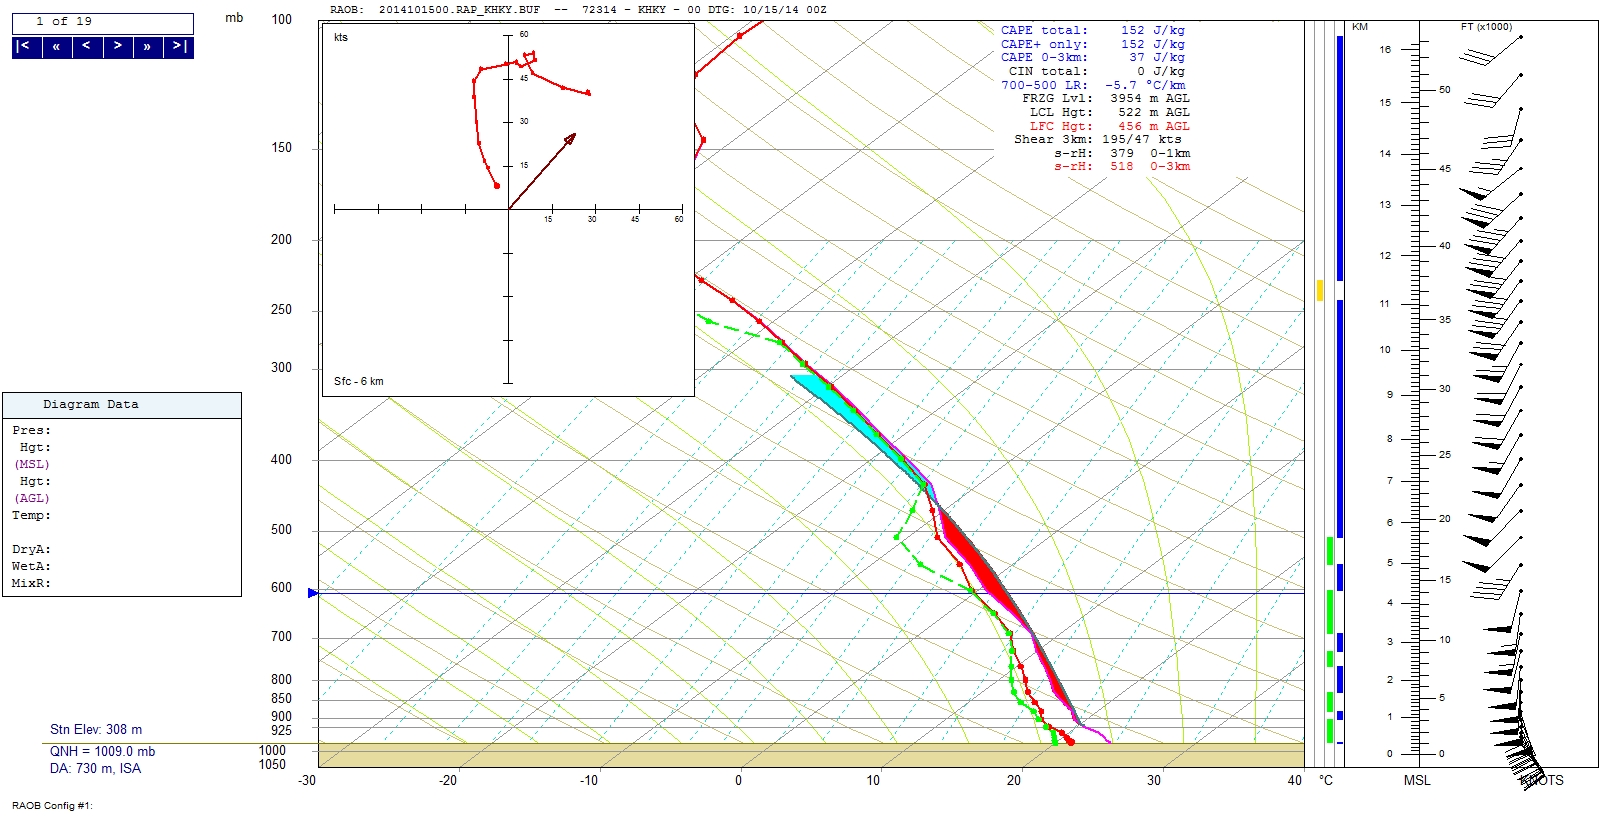 Forecast sounding at HKY from 0000 UTC 15 October 2014 run of the RAP model